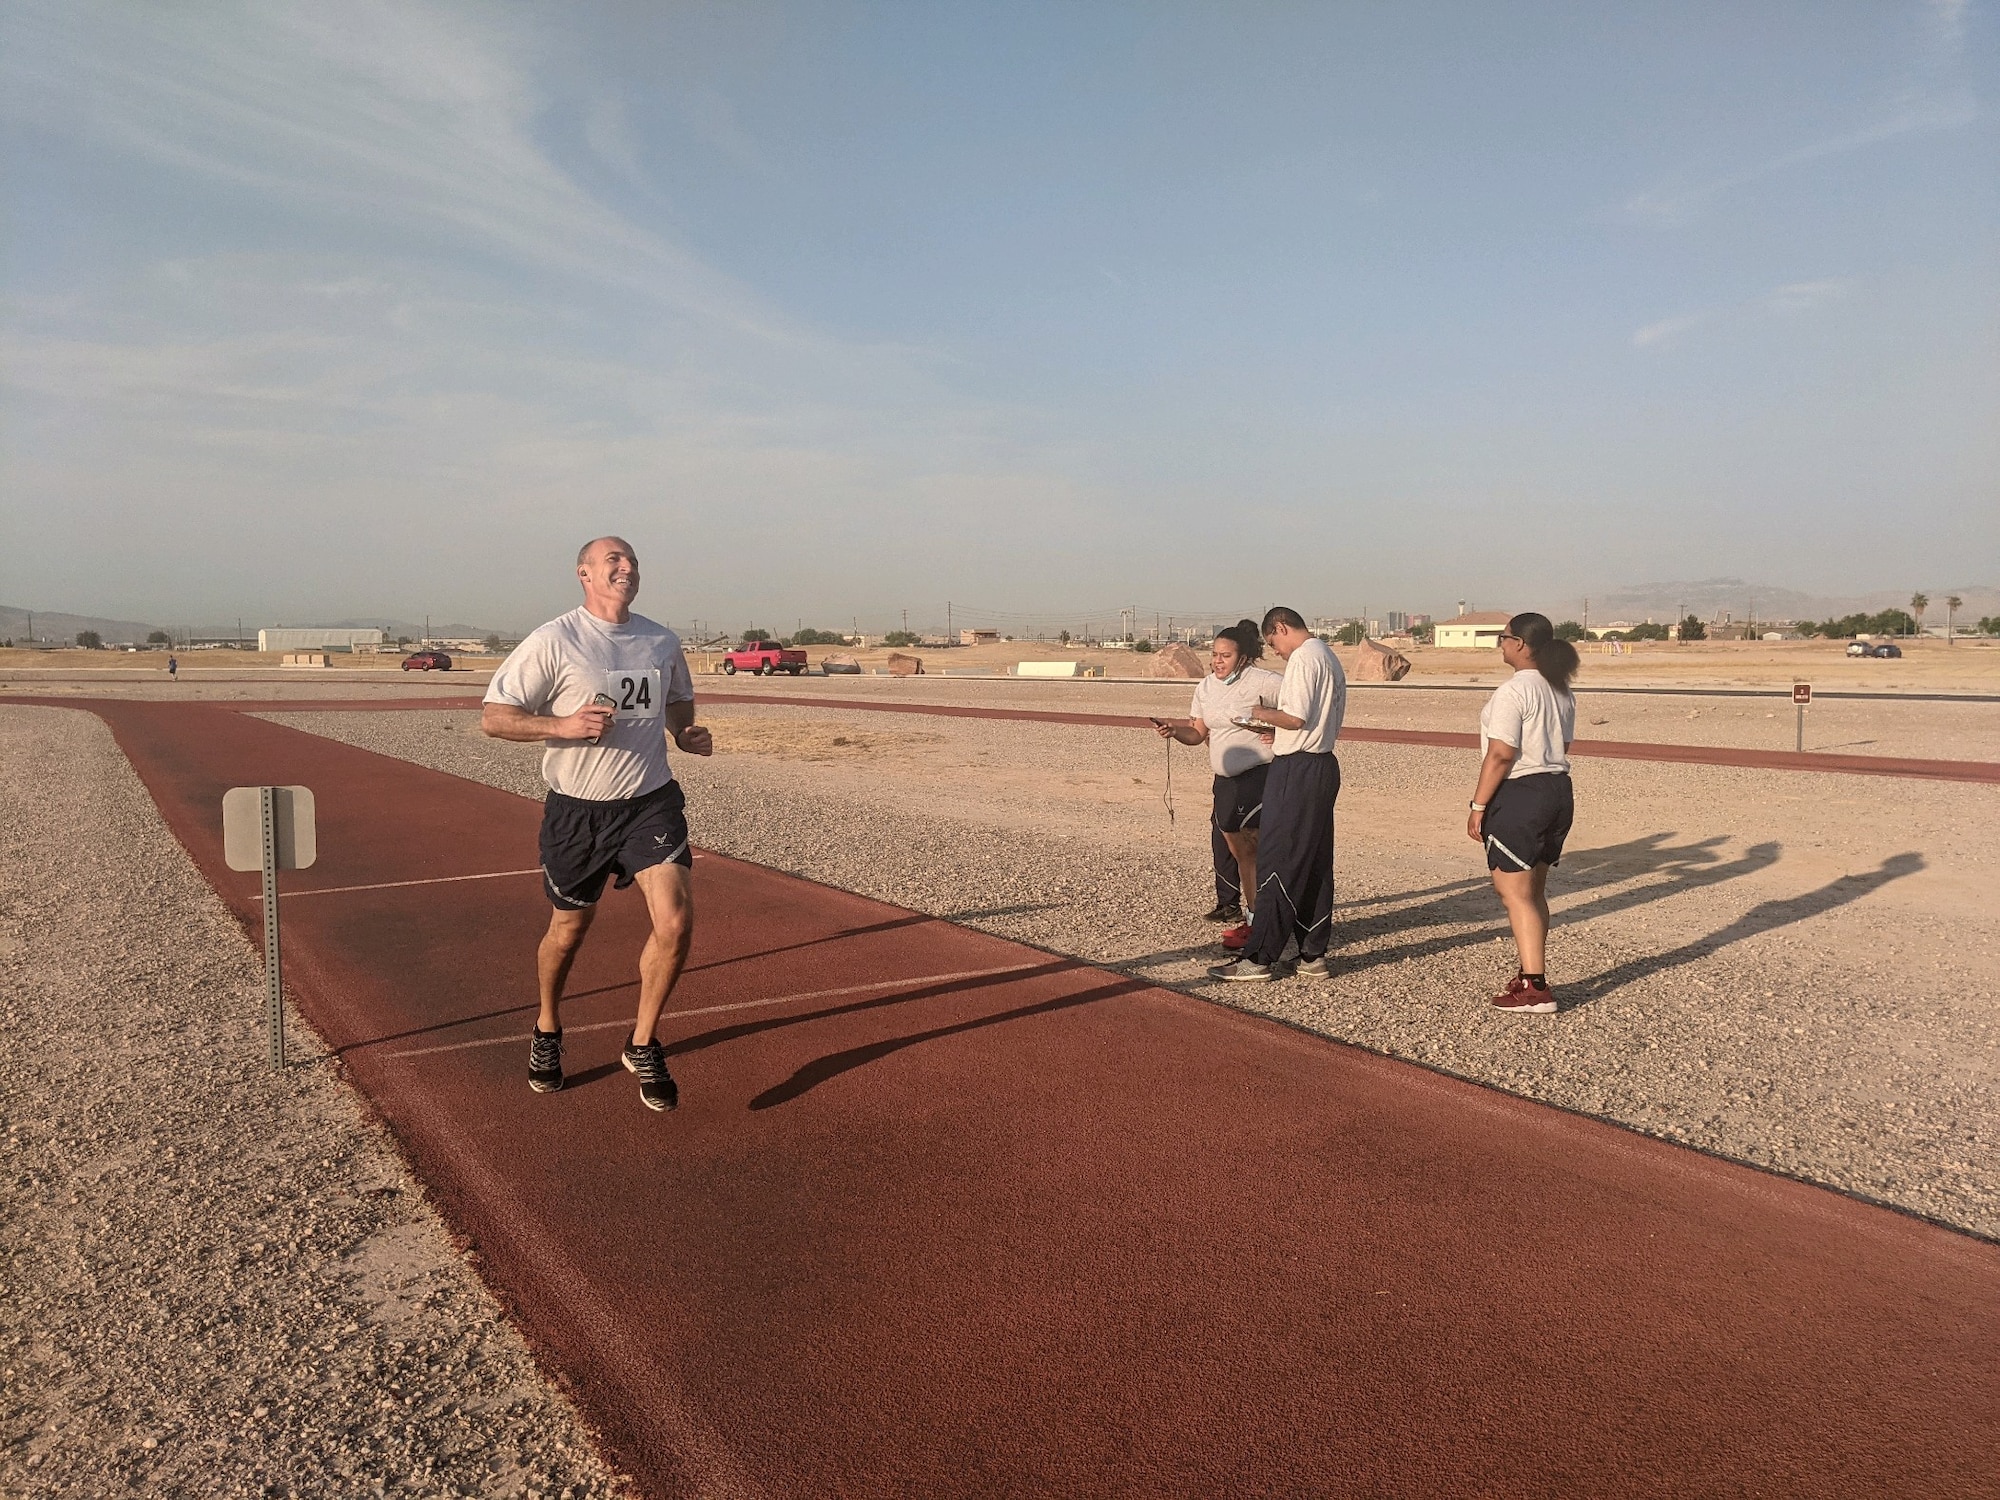 Maj. Mike Giaquinto, 926th Wing Public Affairs officer, performs a diagnostic physical fitness test, June 15, at Nellis Air Force Base, Nevada. (U.S. Air Force by Dan Mena)